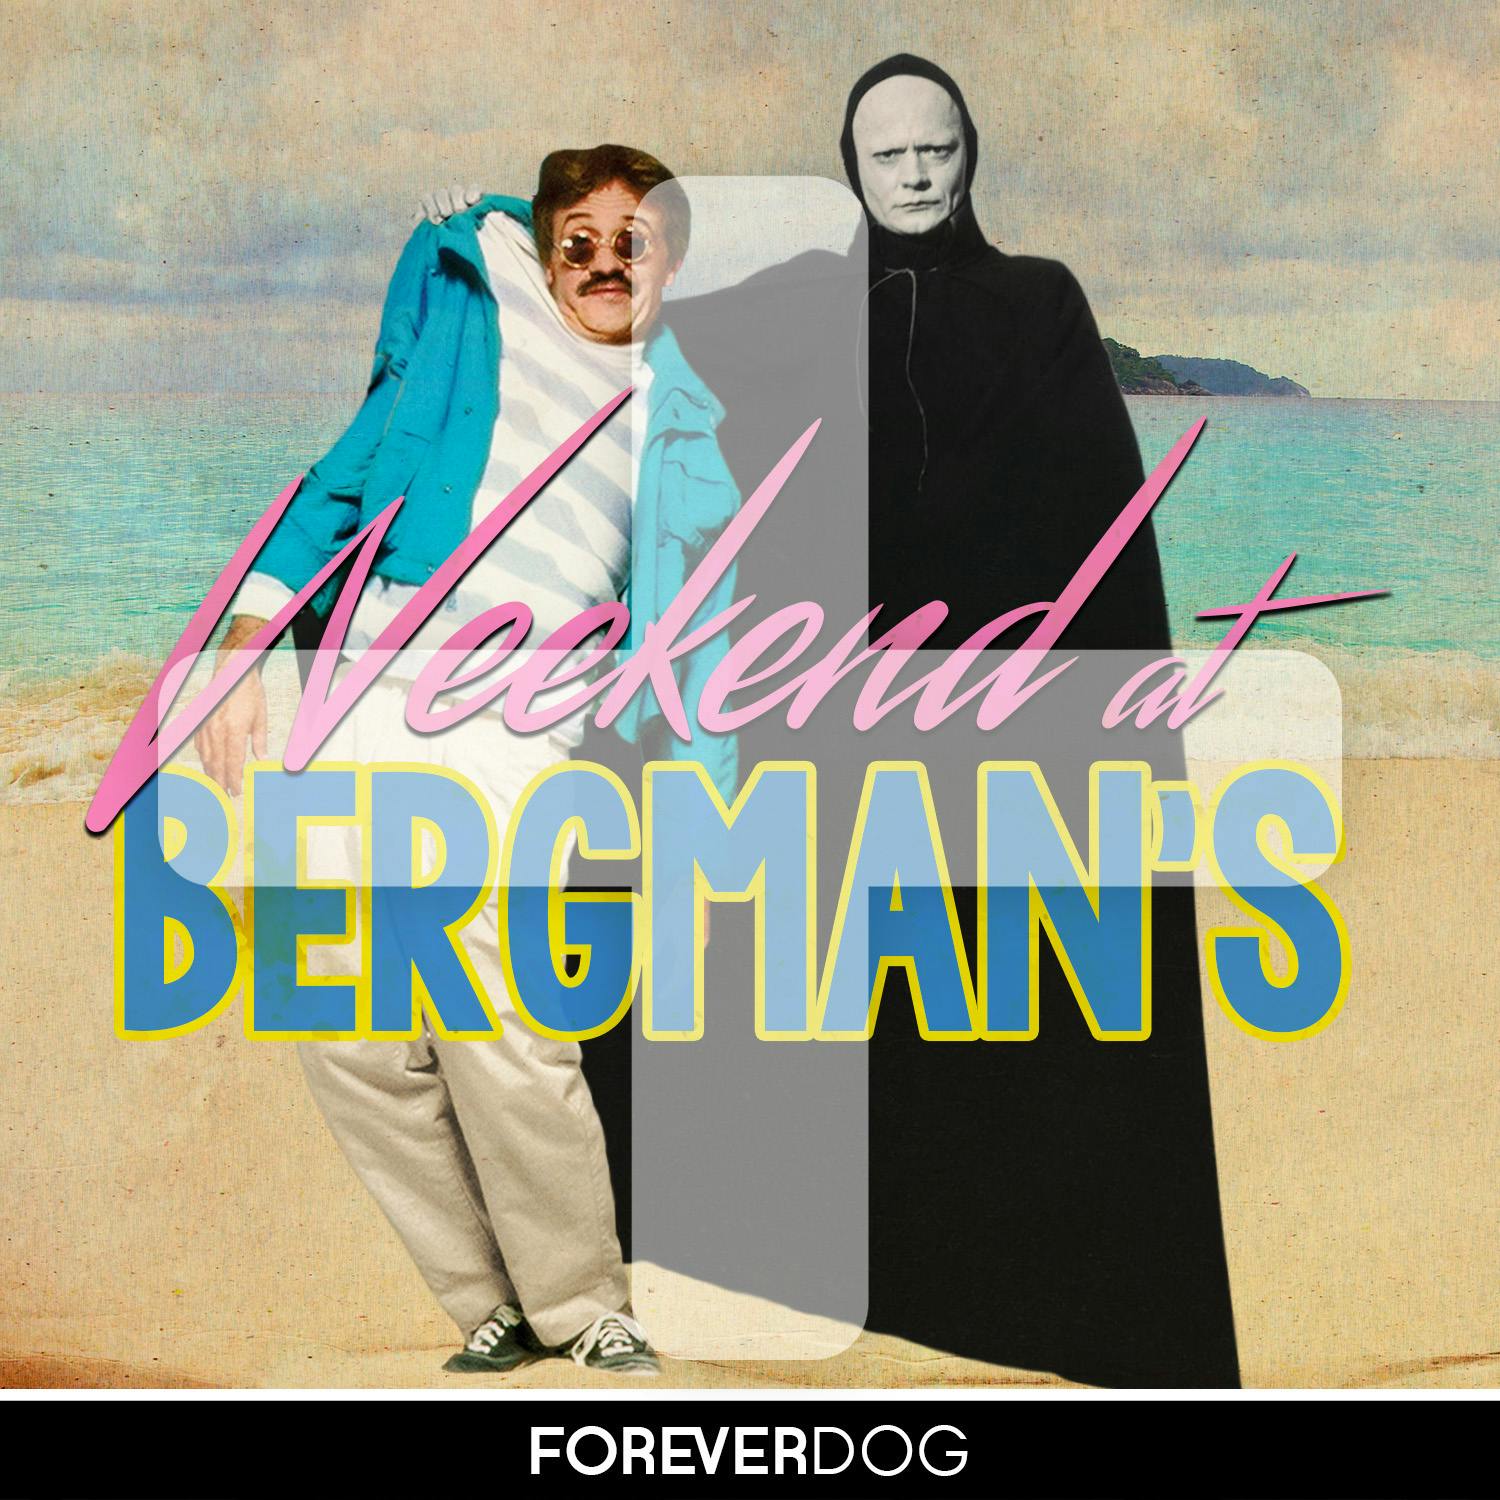 Weekend at Bergman's PLUS podcast tile